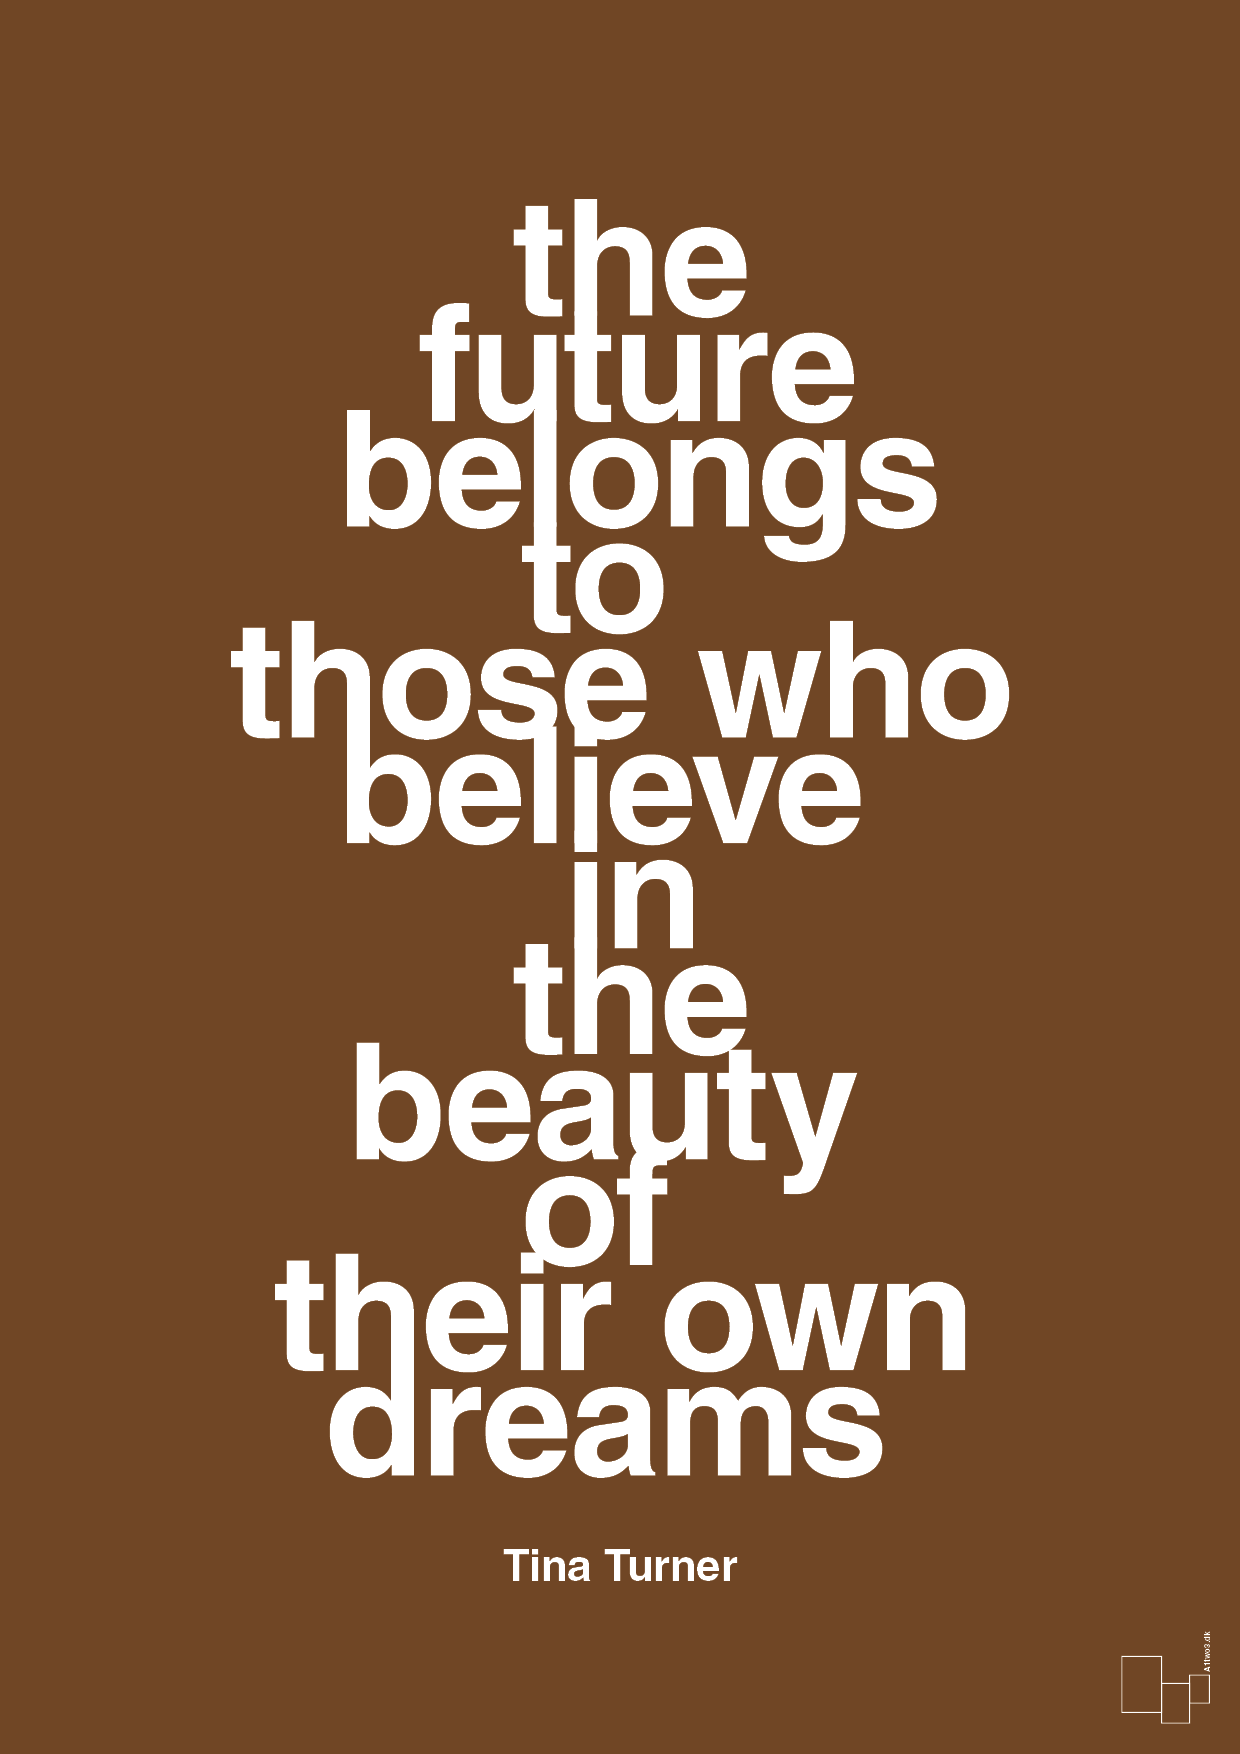 the future belongs to those who believe in the beauty of their own dreams - Plakat med Citater i Dark Brown